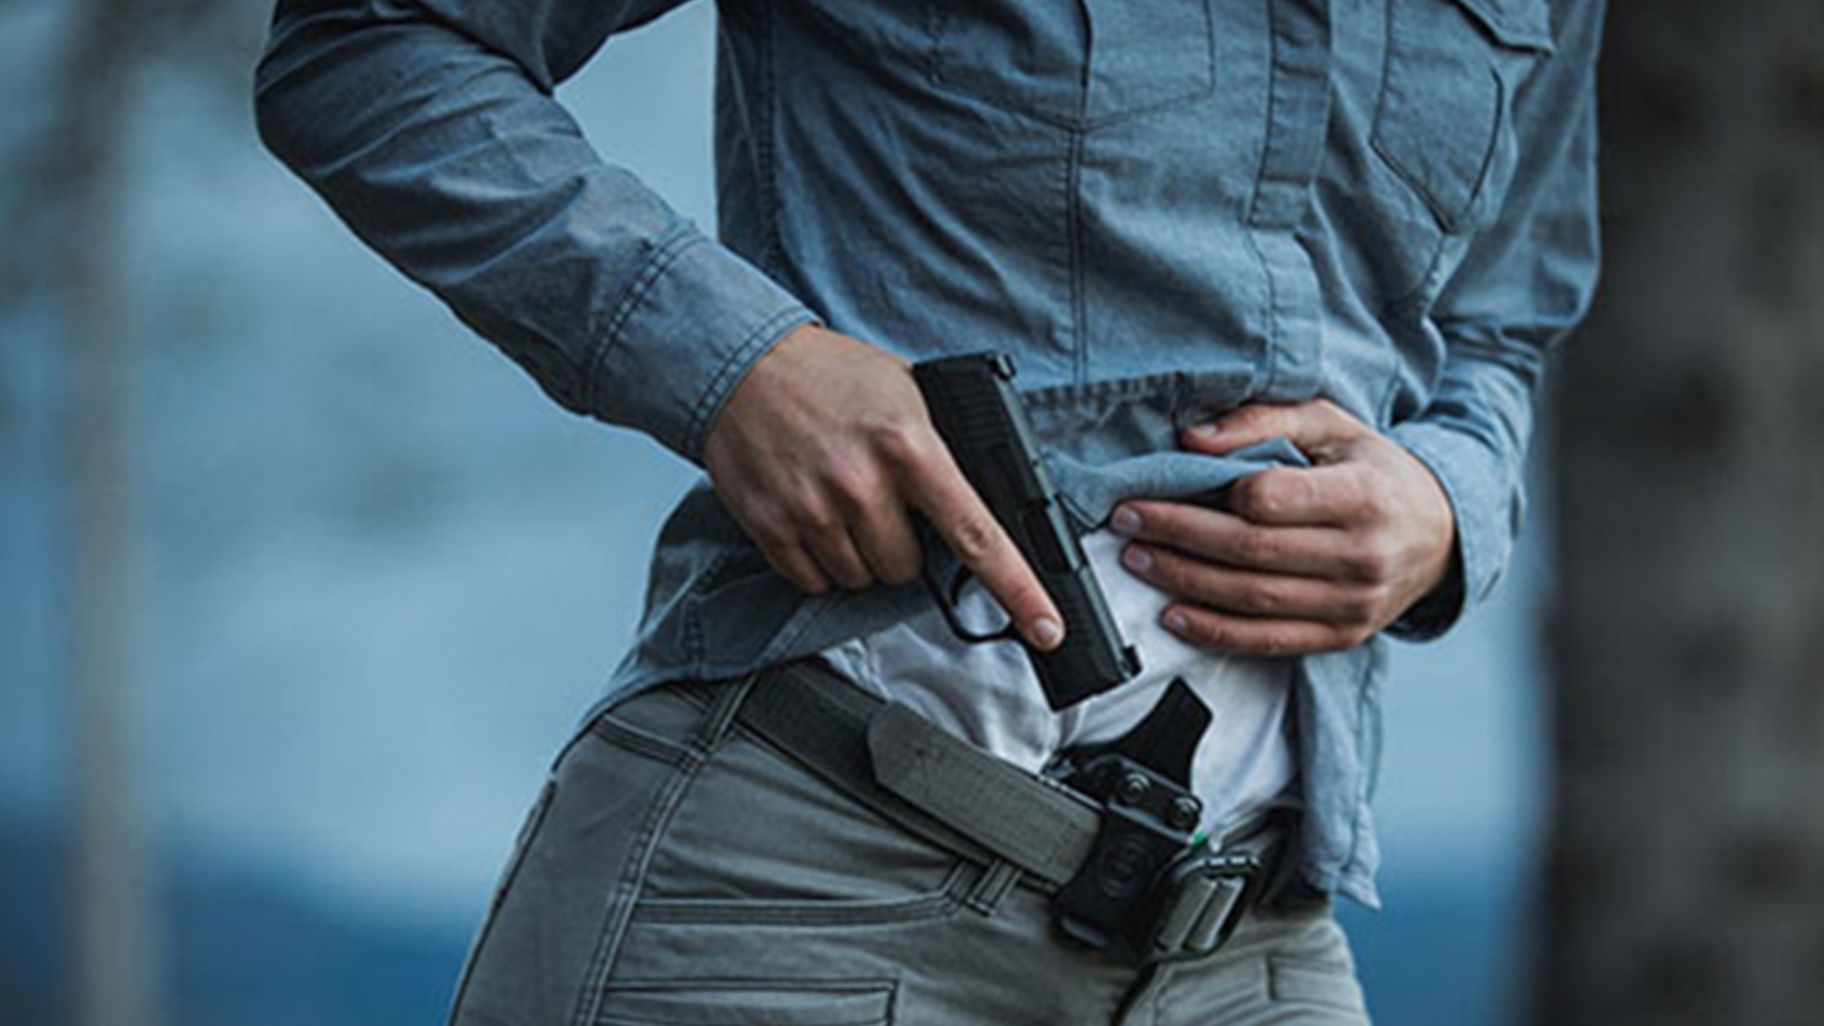 Concealed carry in Summer Clothing - Concealed Carry - USCCA Community